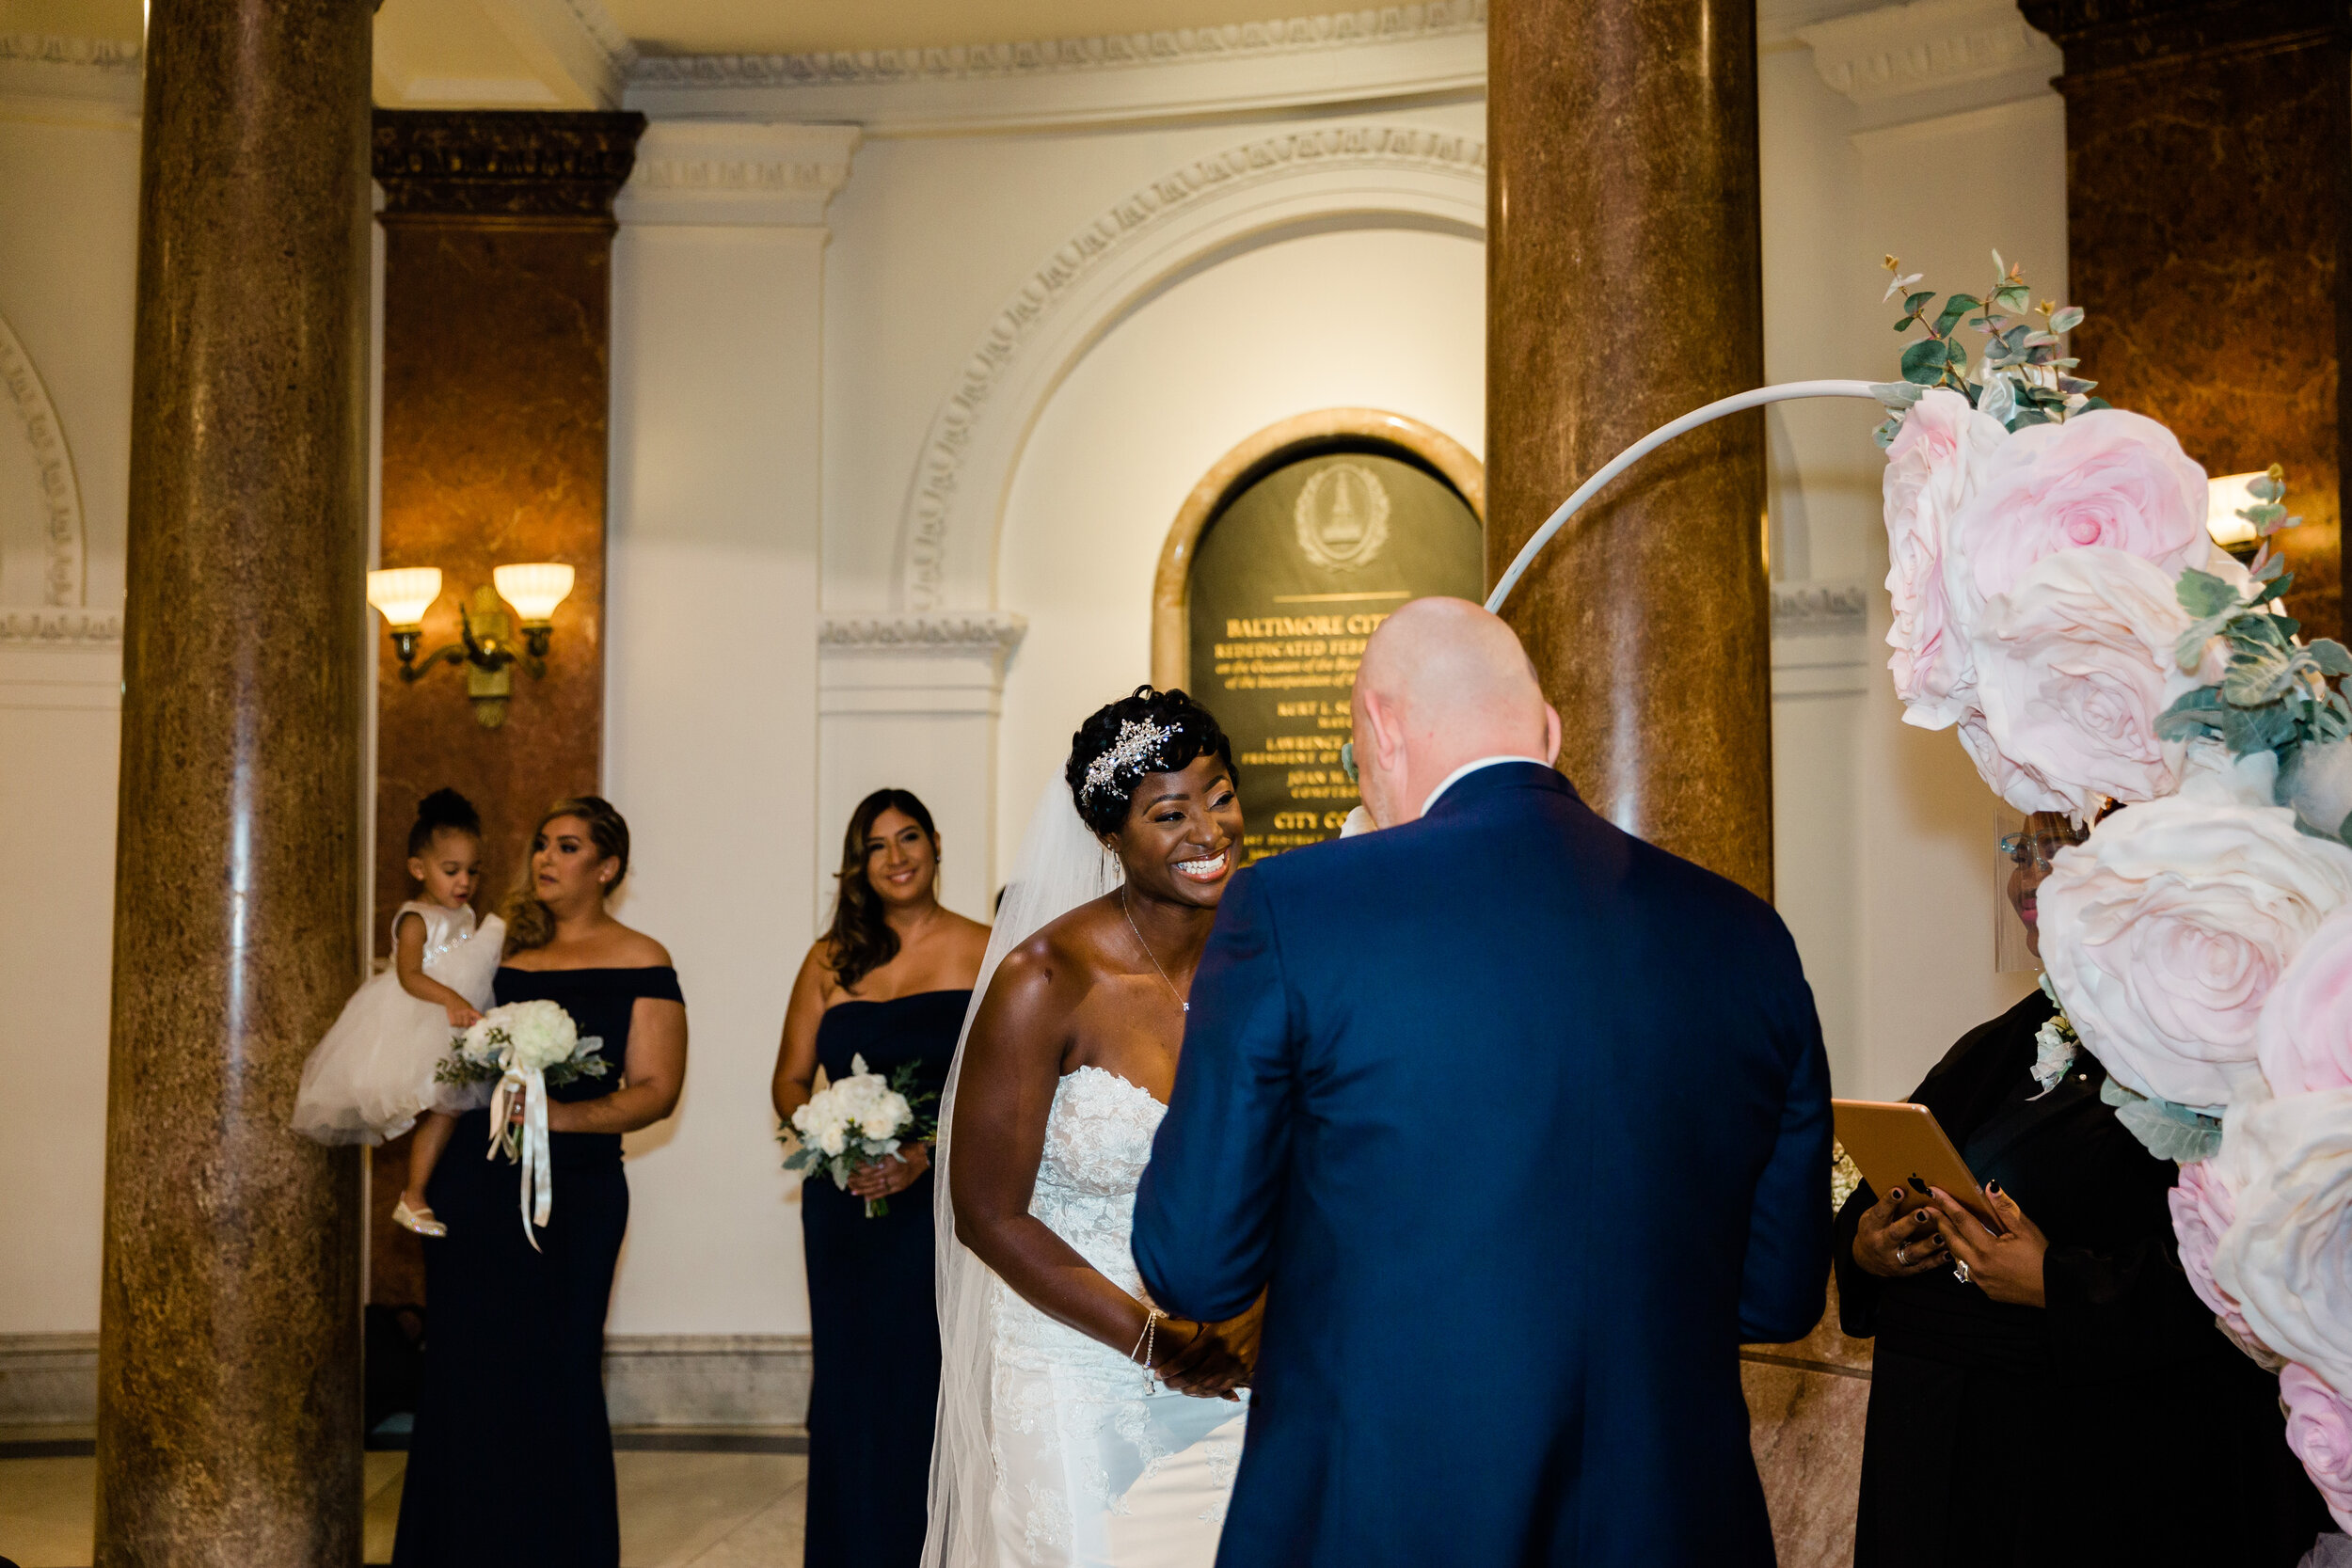 get married in baltimore city hall shot by megapixels media biracial couple wedding photographers maryland-70.jpg